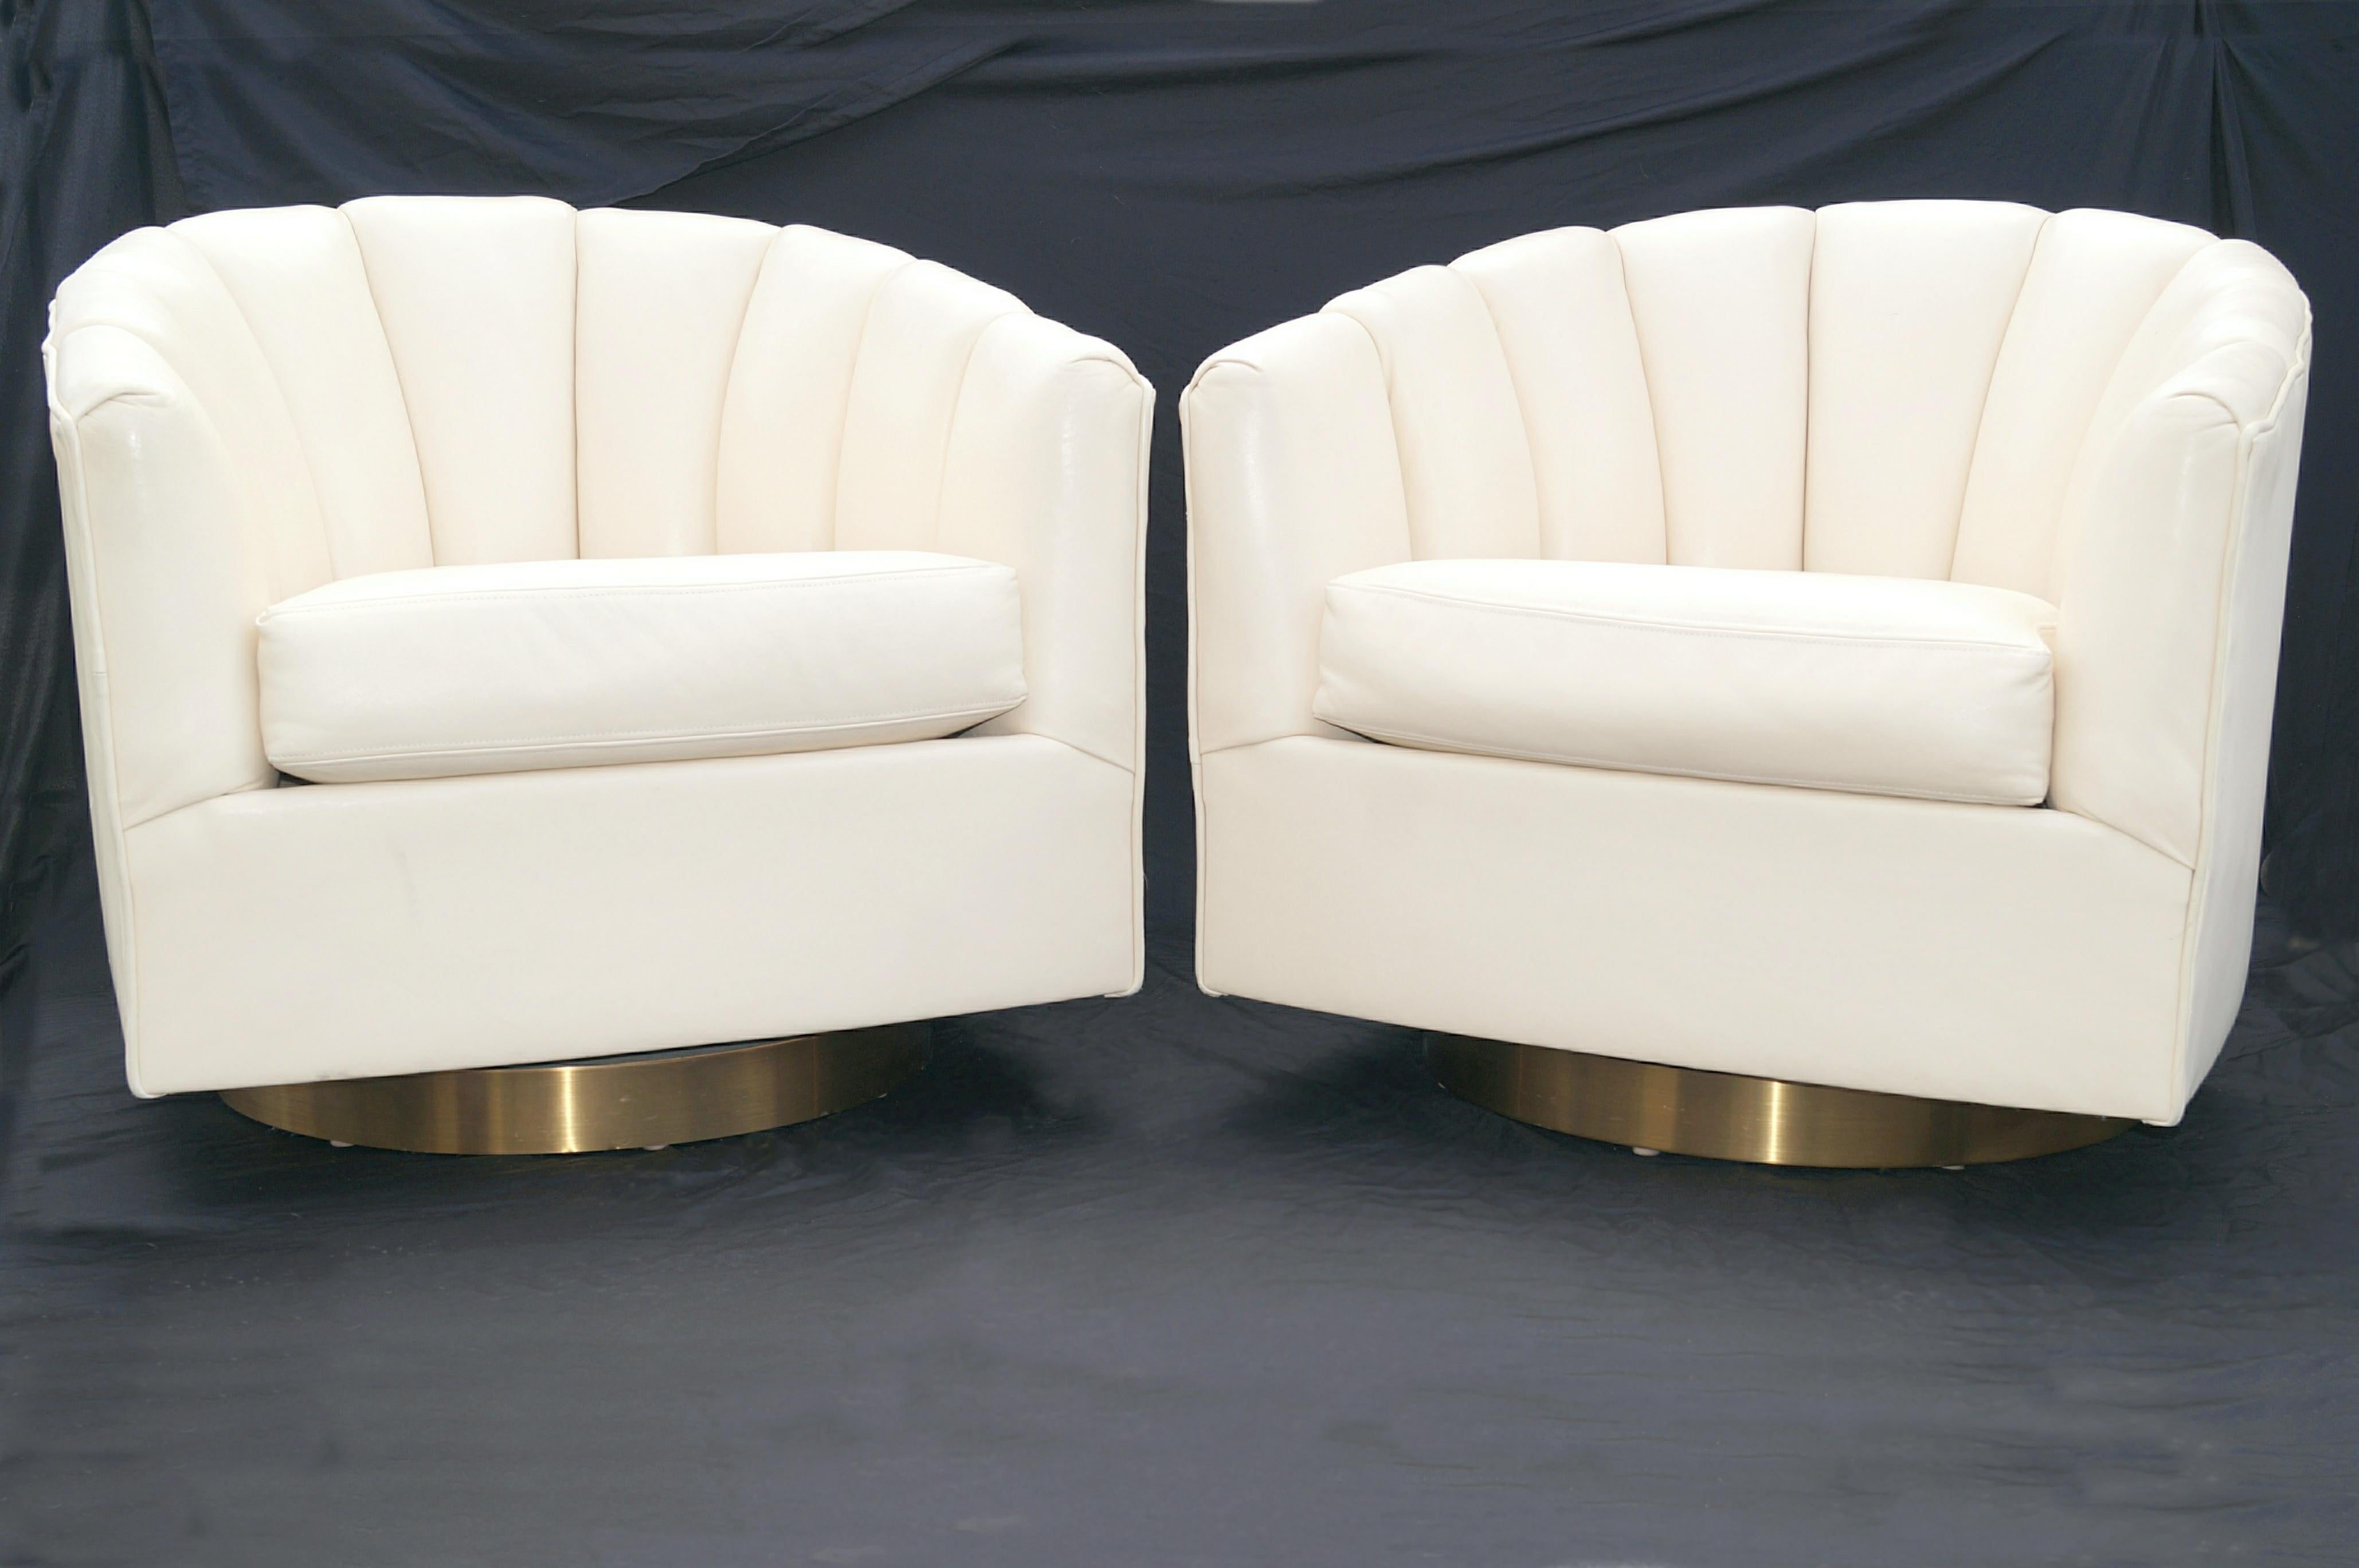 Pair Milo Baughman Style Brass Base Swivel Club Lounge Chairs . These do a swivel 180 turn. 2 Pairs currently available. Each set is for 2 chairs. The seat cushions appear to be leather, as the underside appears to have hide. See photo. The